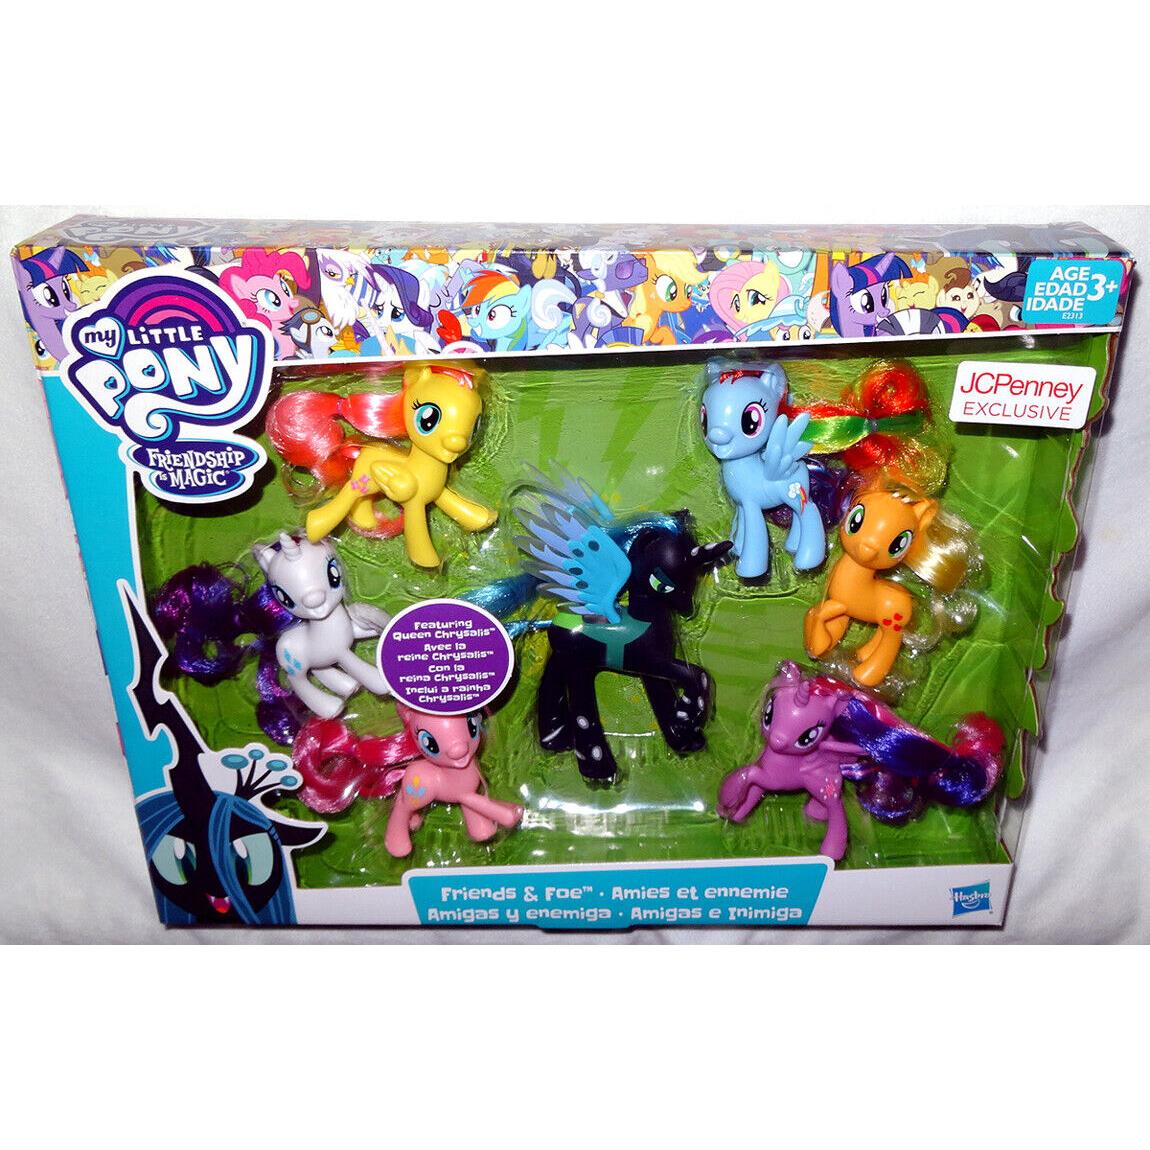 My Little Pony Friends Foe Set Mib Jcpenney Exclusive Friendship Is Magic Toy